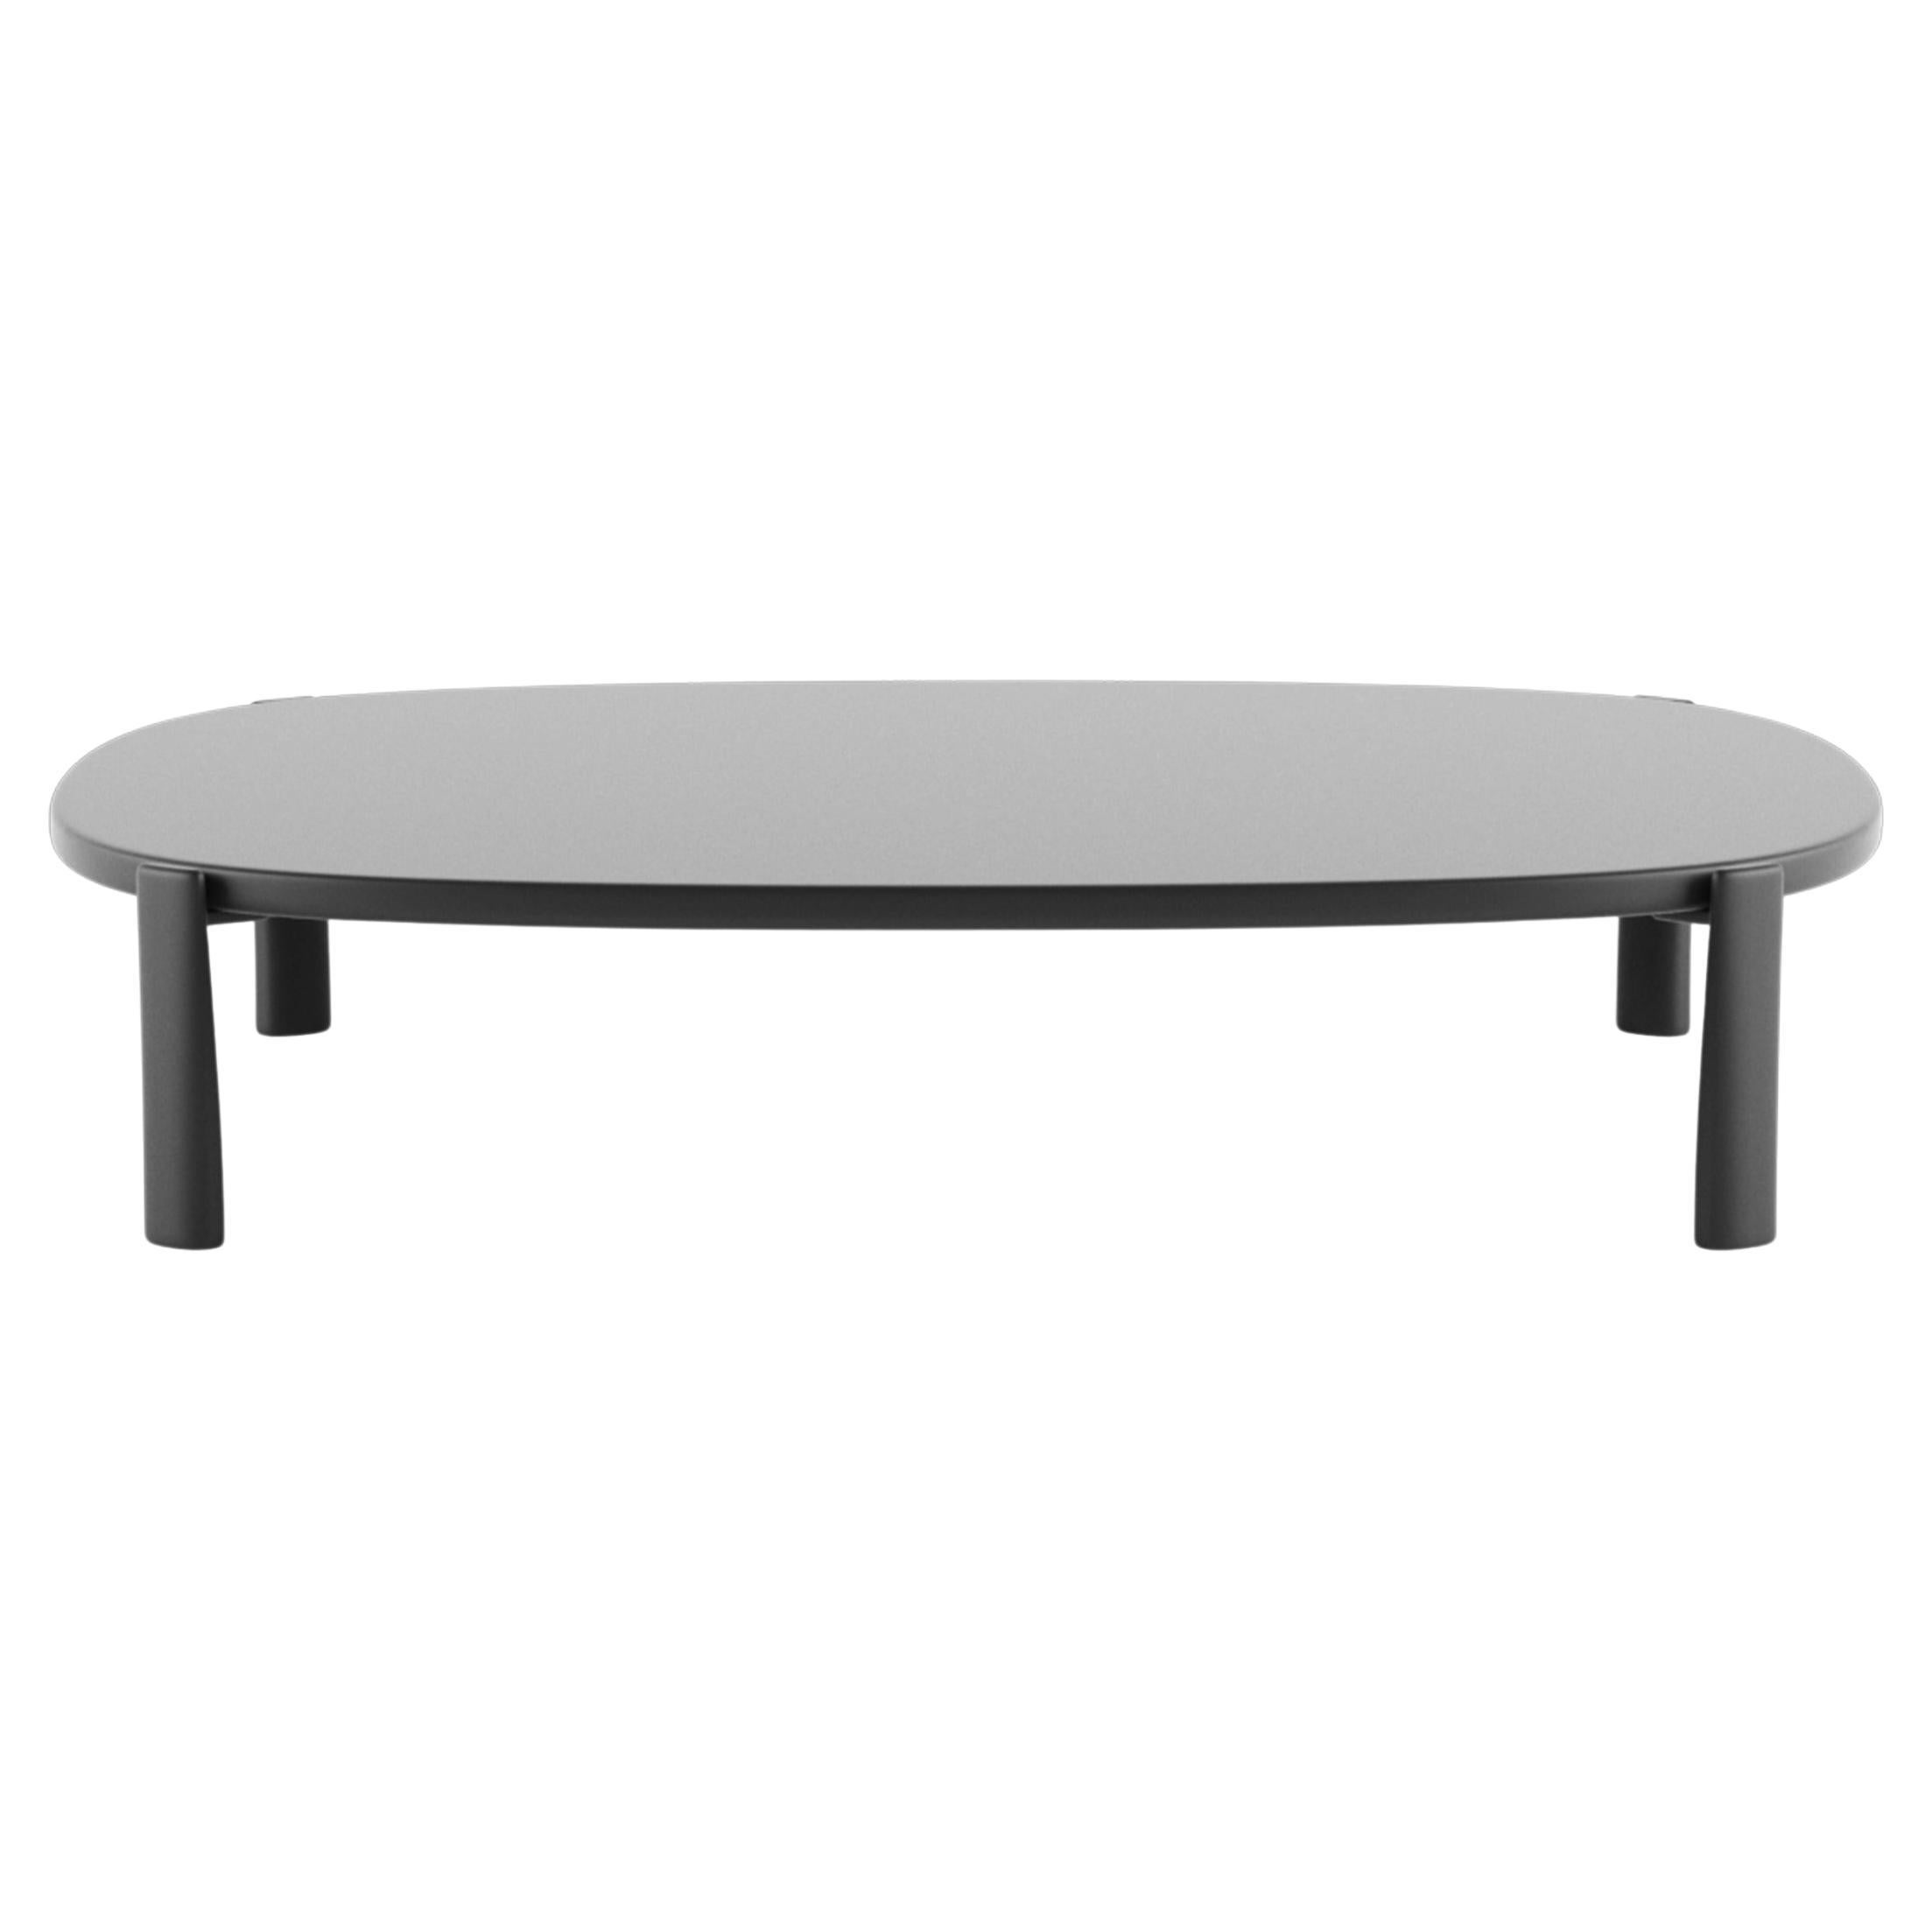 Alias T11_O Ten Outdoor Table 80x80 in Grey Glazed Ceramic Top w Lacquered Frame For Sale